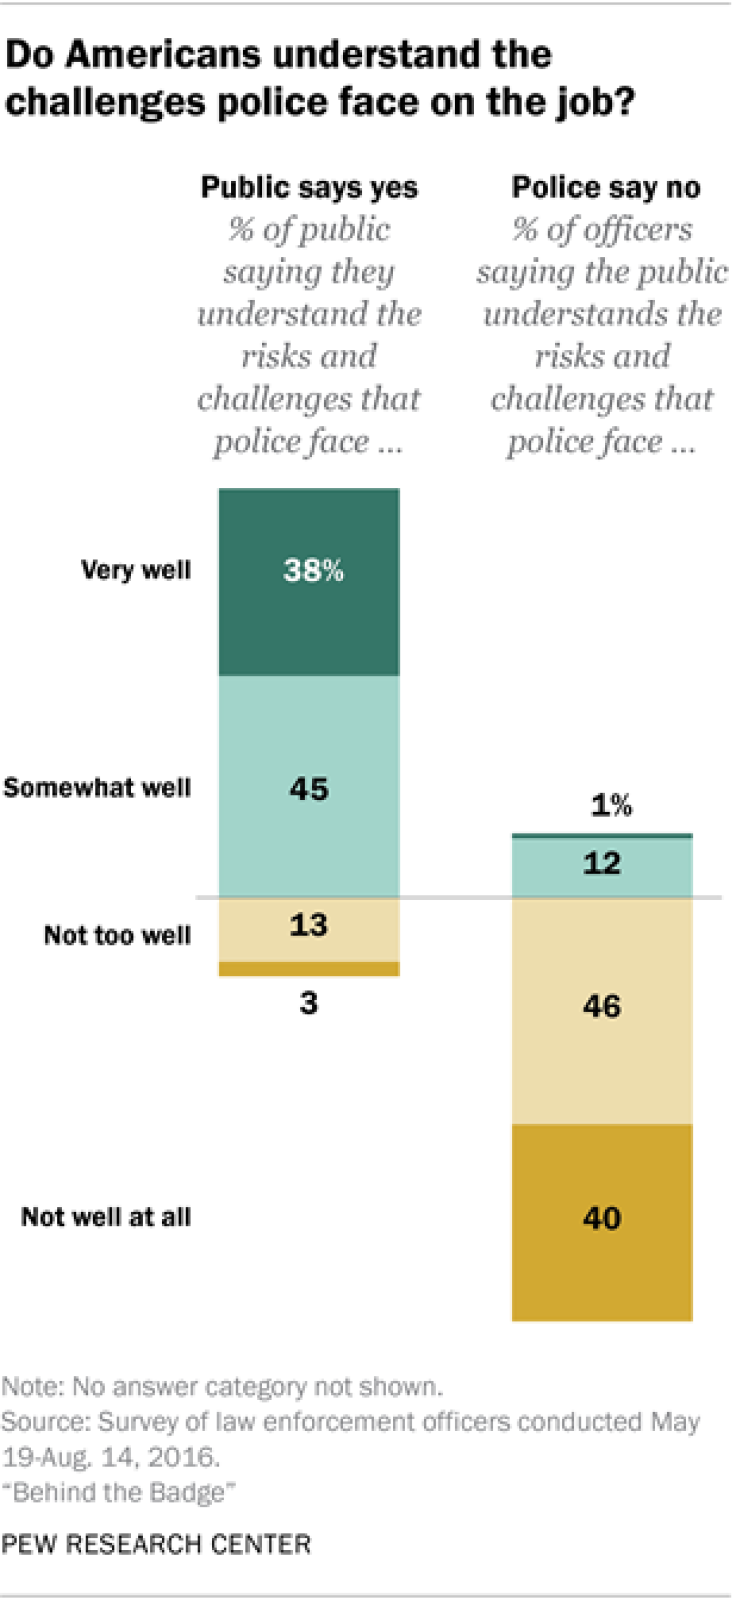 Do Americans understand the challenges police face on the job?